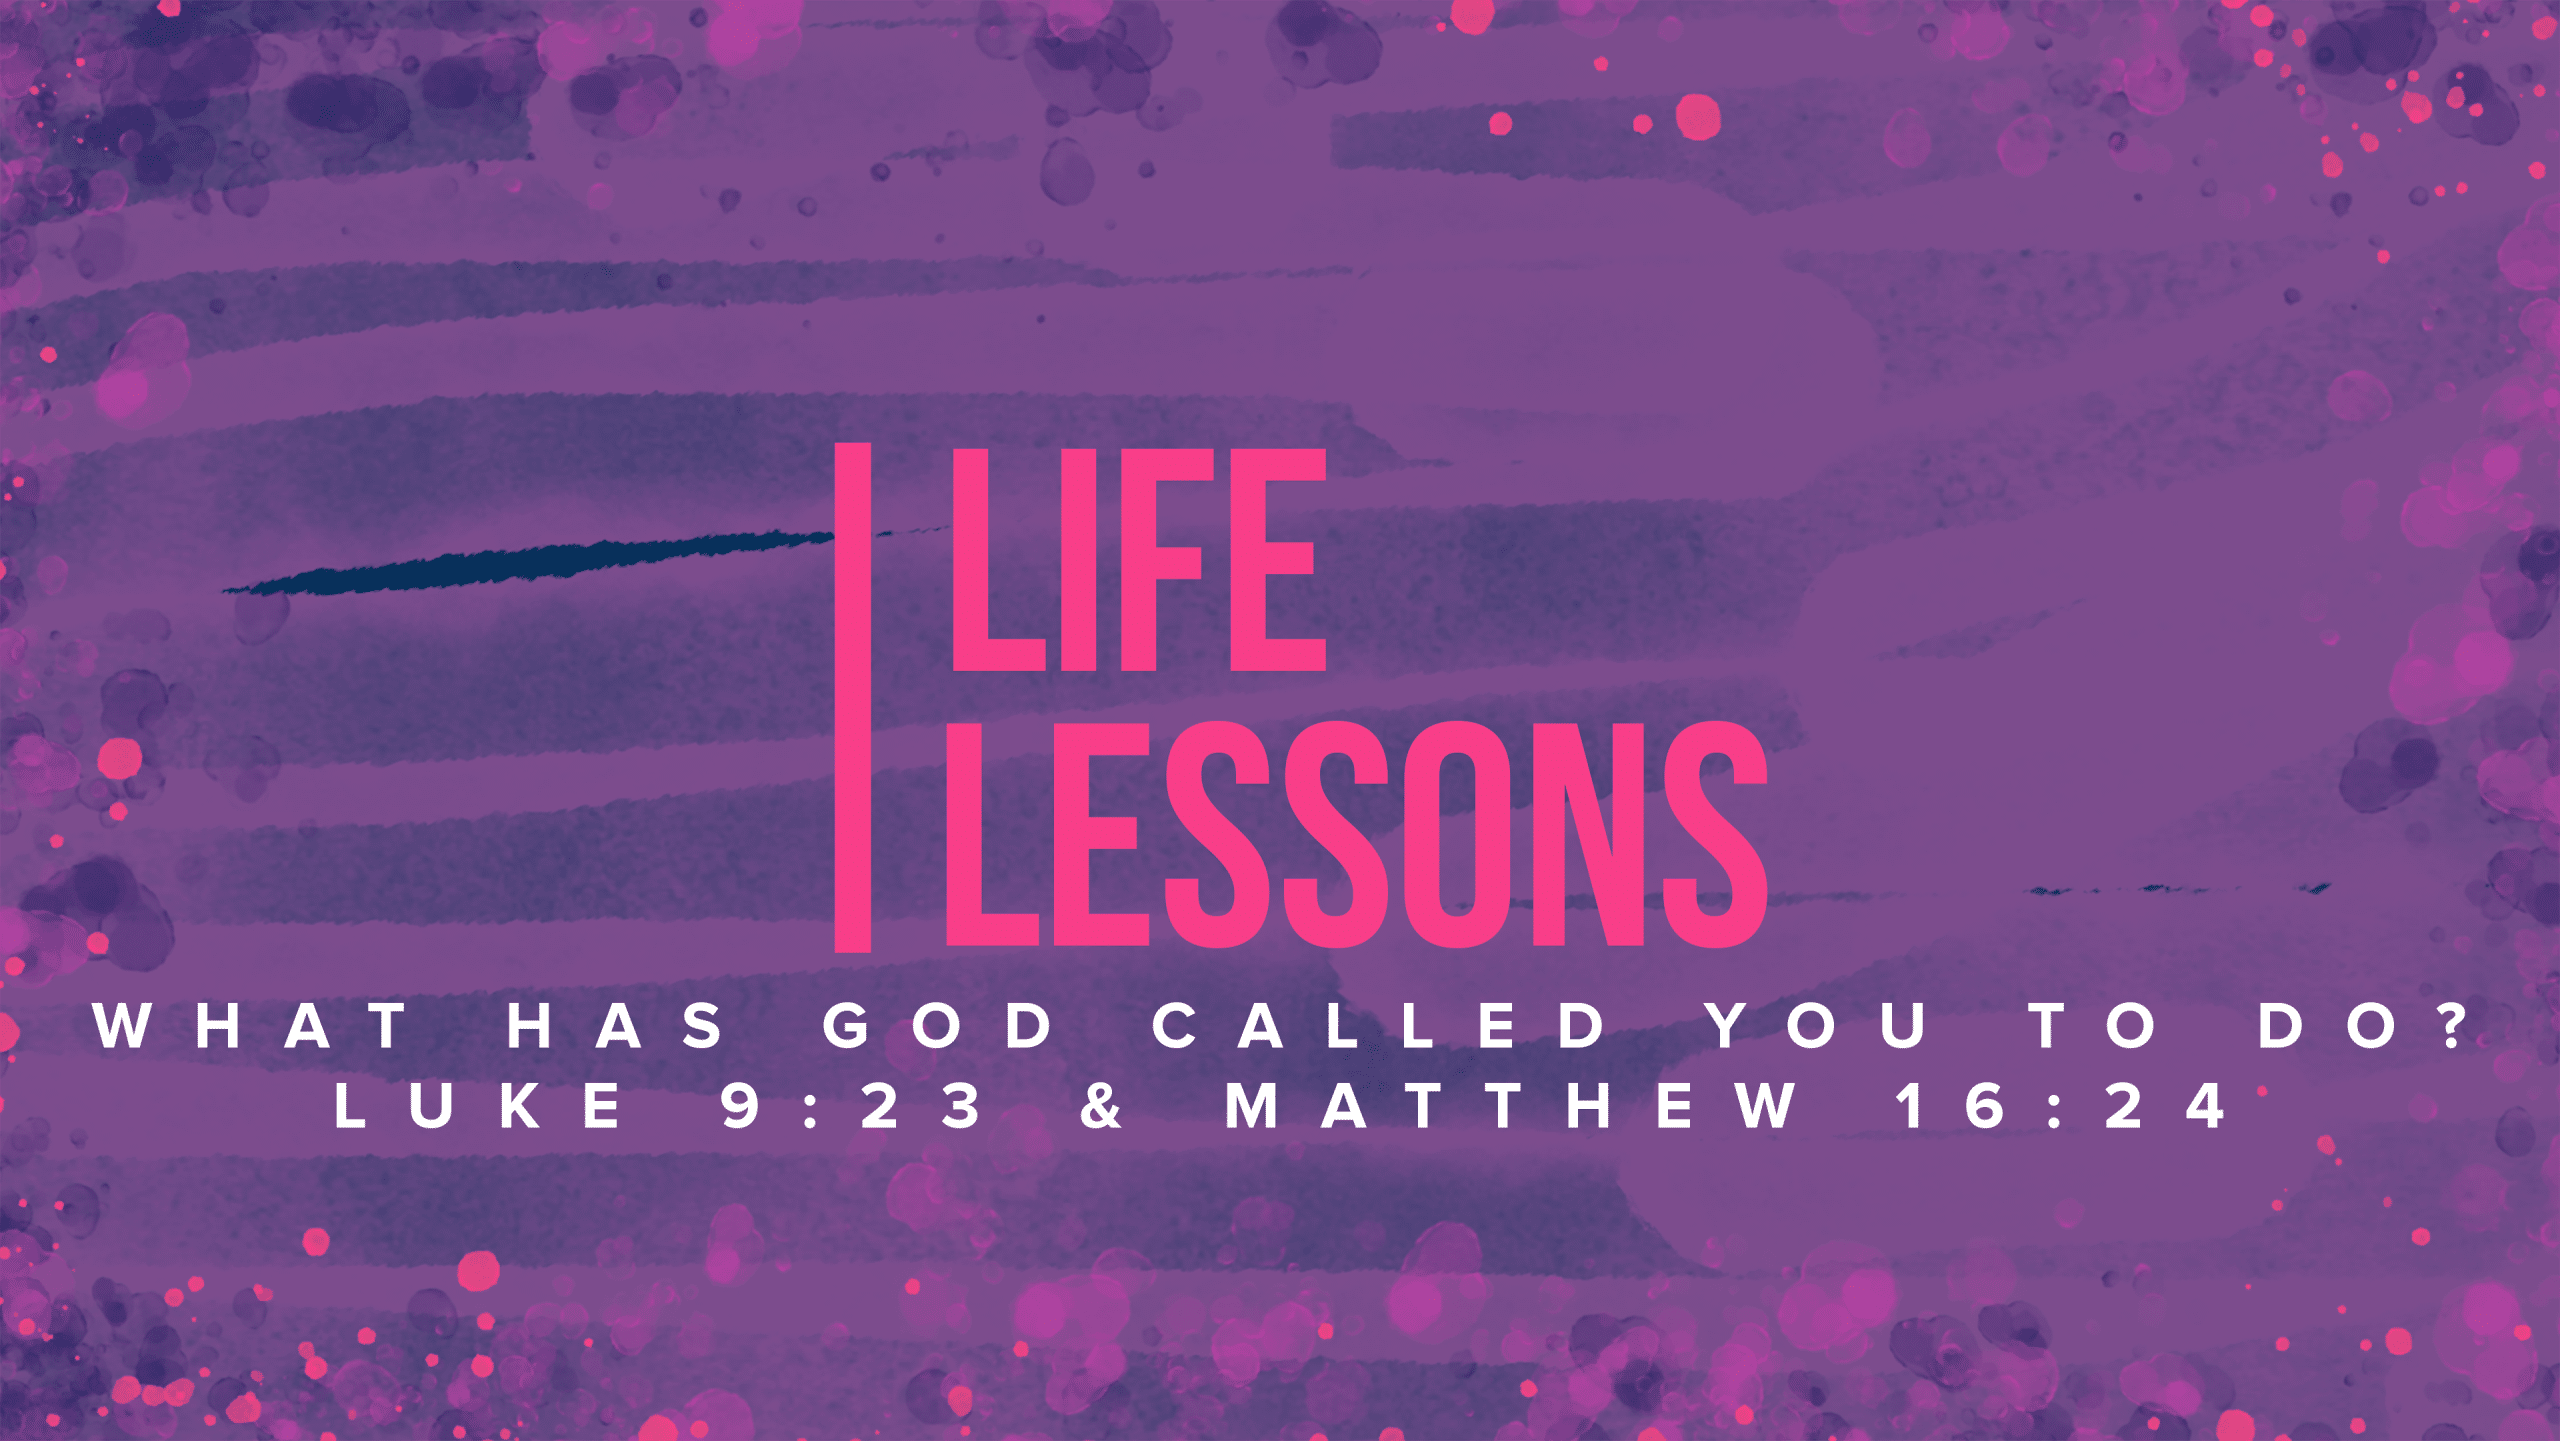 Life Lessons: What Has God Called You To Do?